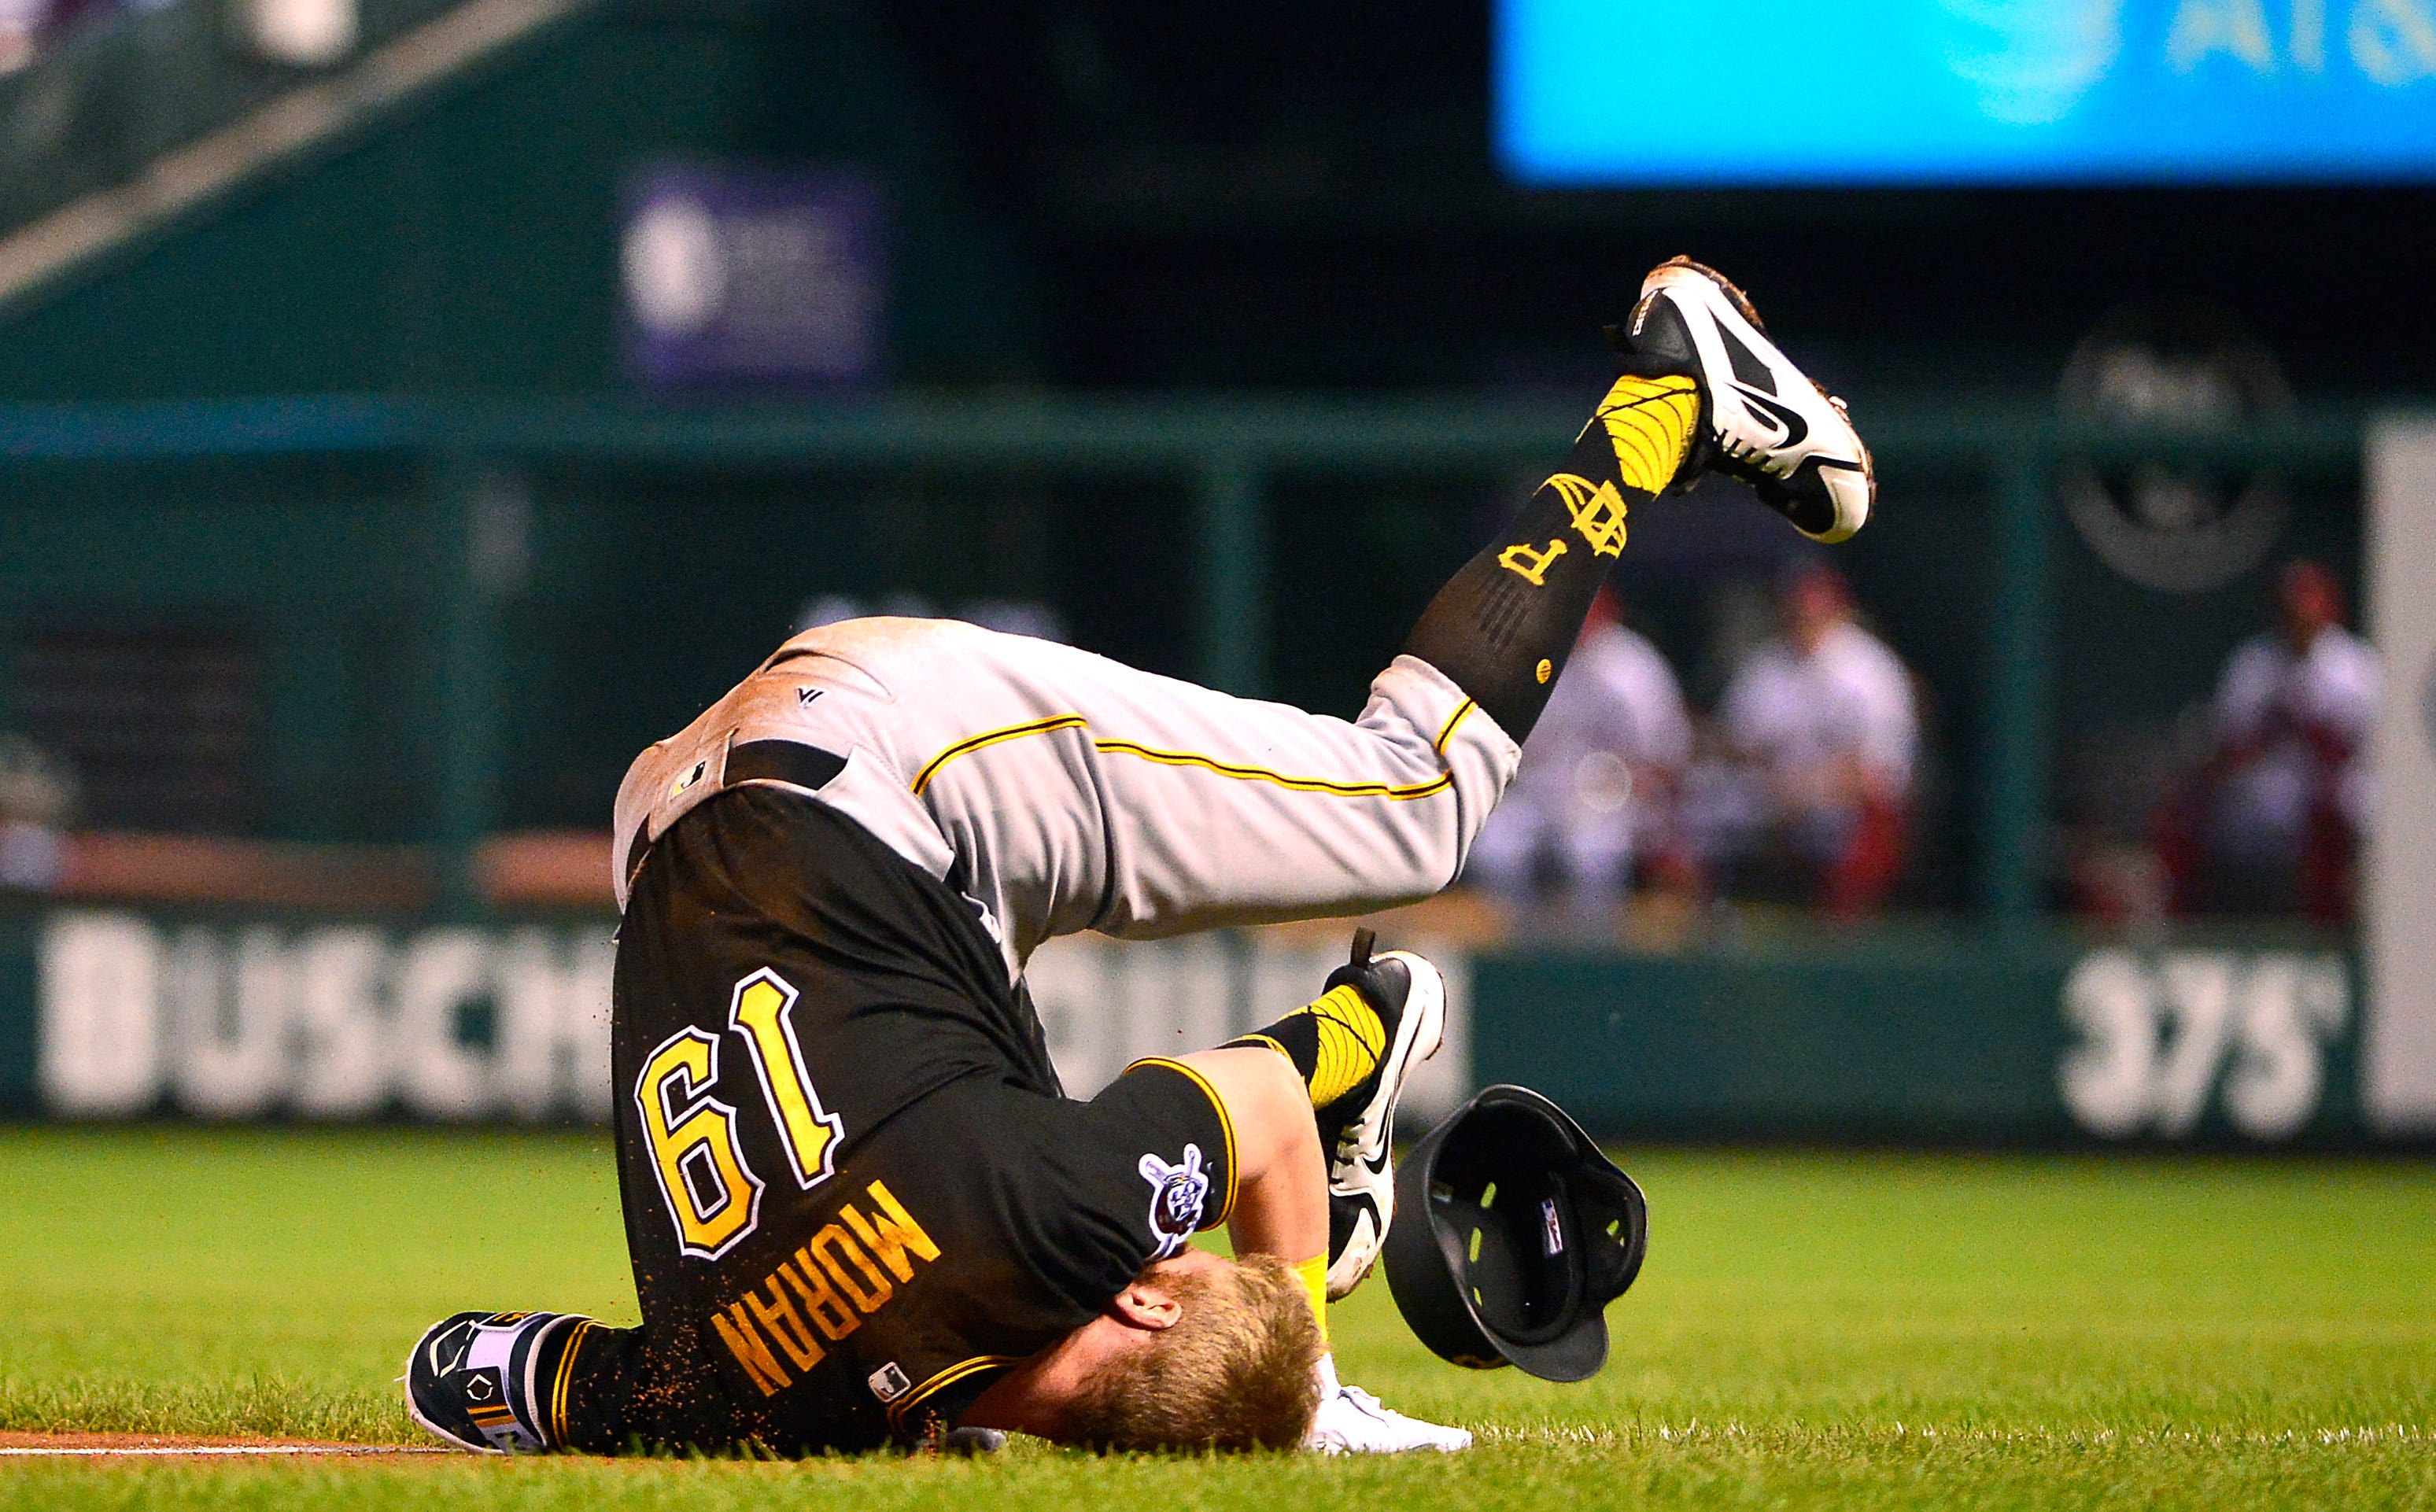 Pittsburgh Pirates third baseman Colin Moran falls to the grass after being forced out at first base during the fourth inning against the St. Louis Cardinals at Busch Stadium in St. Louis.